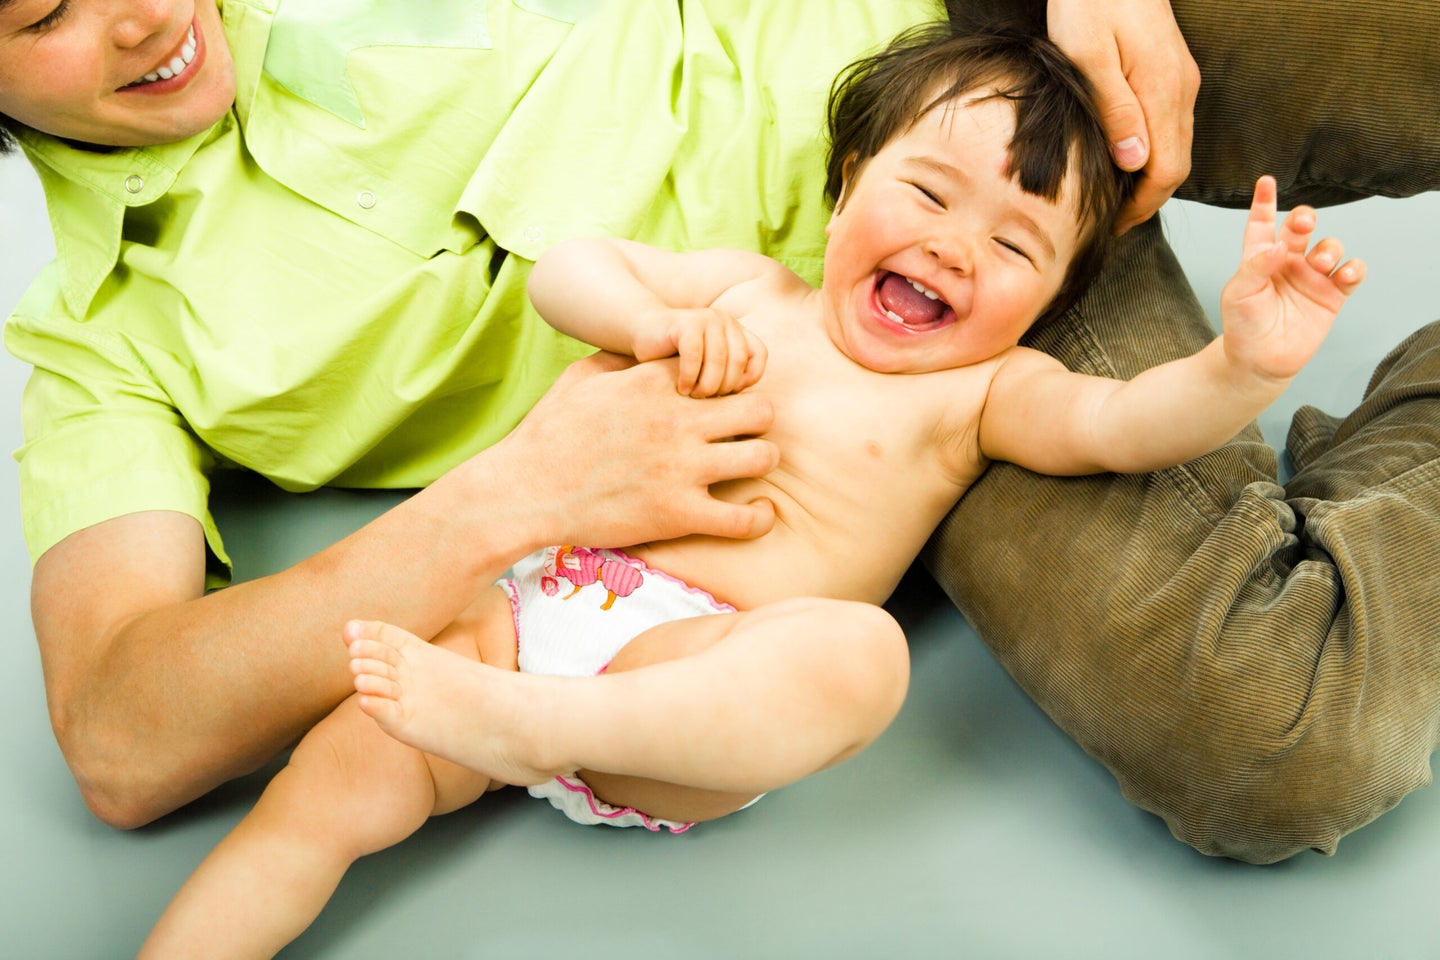 a woman tickles a smiling baby